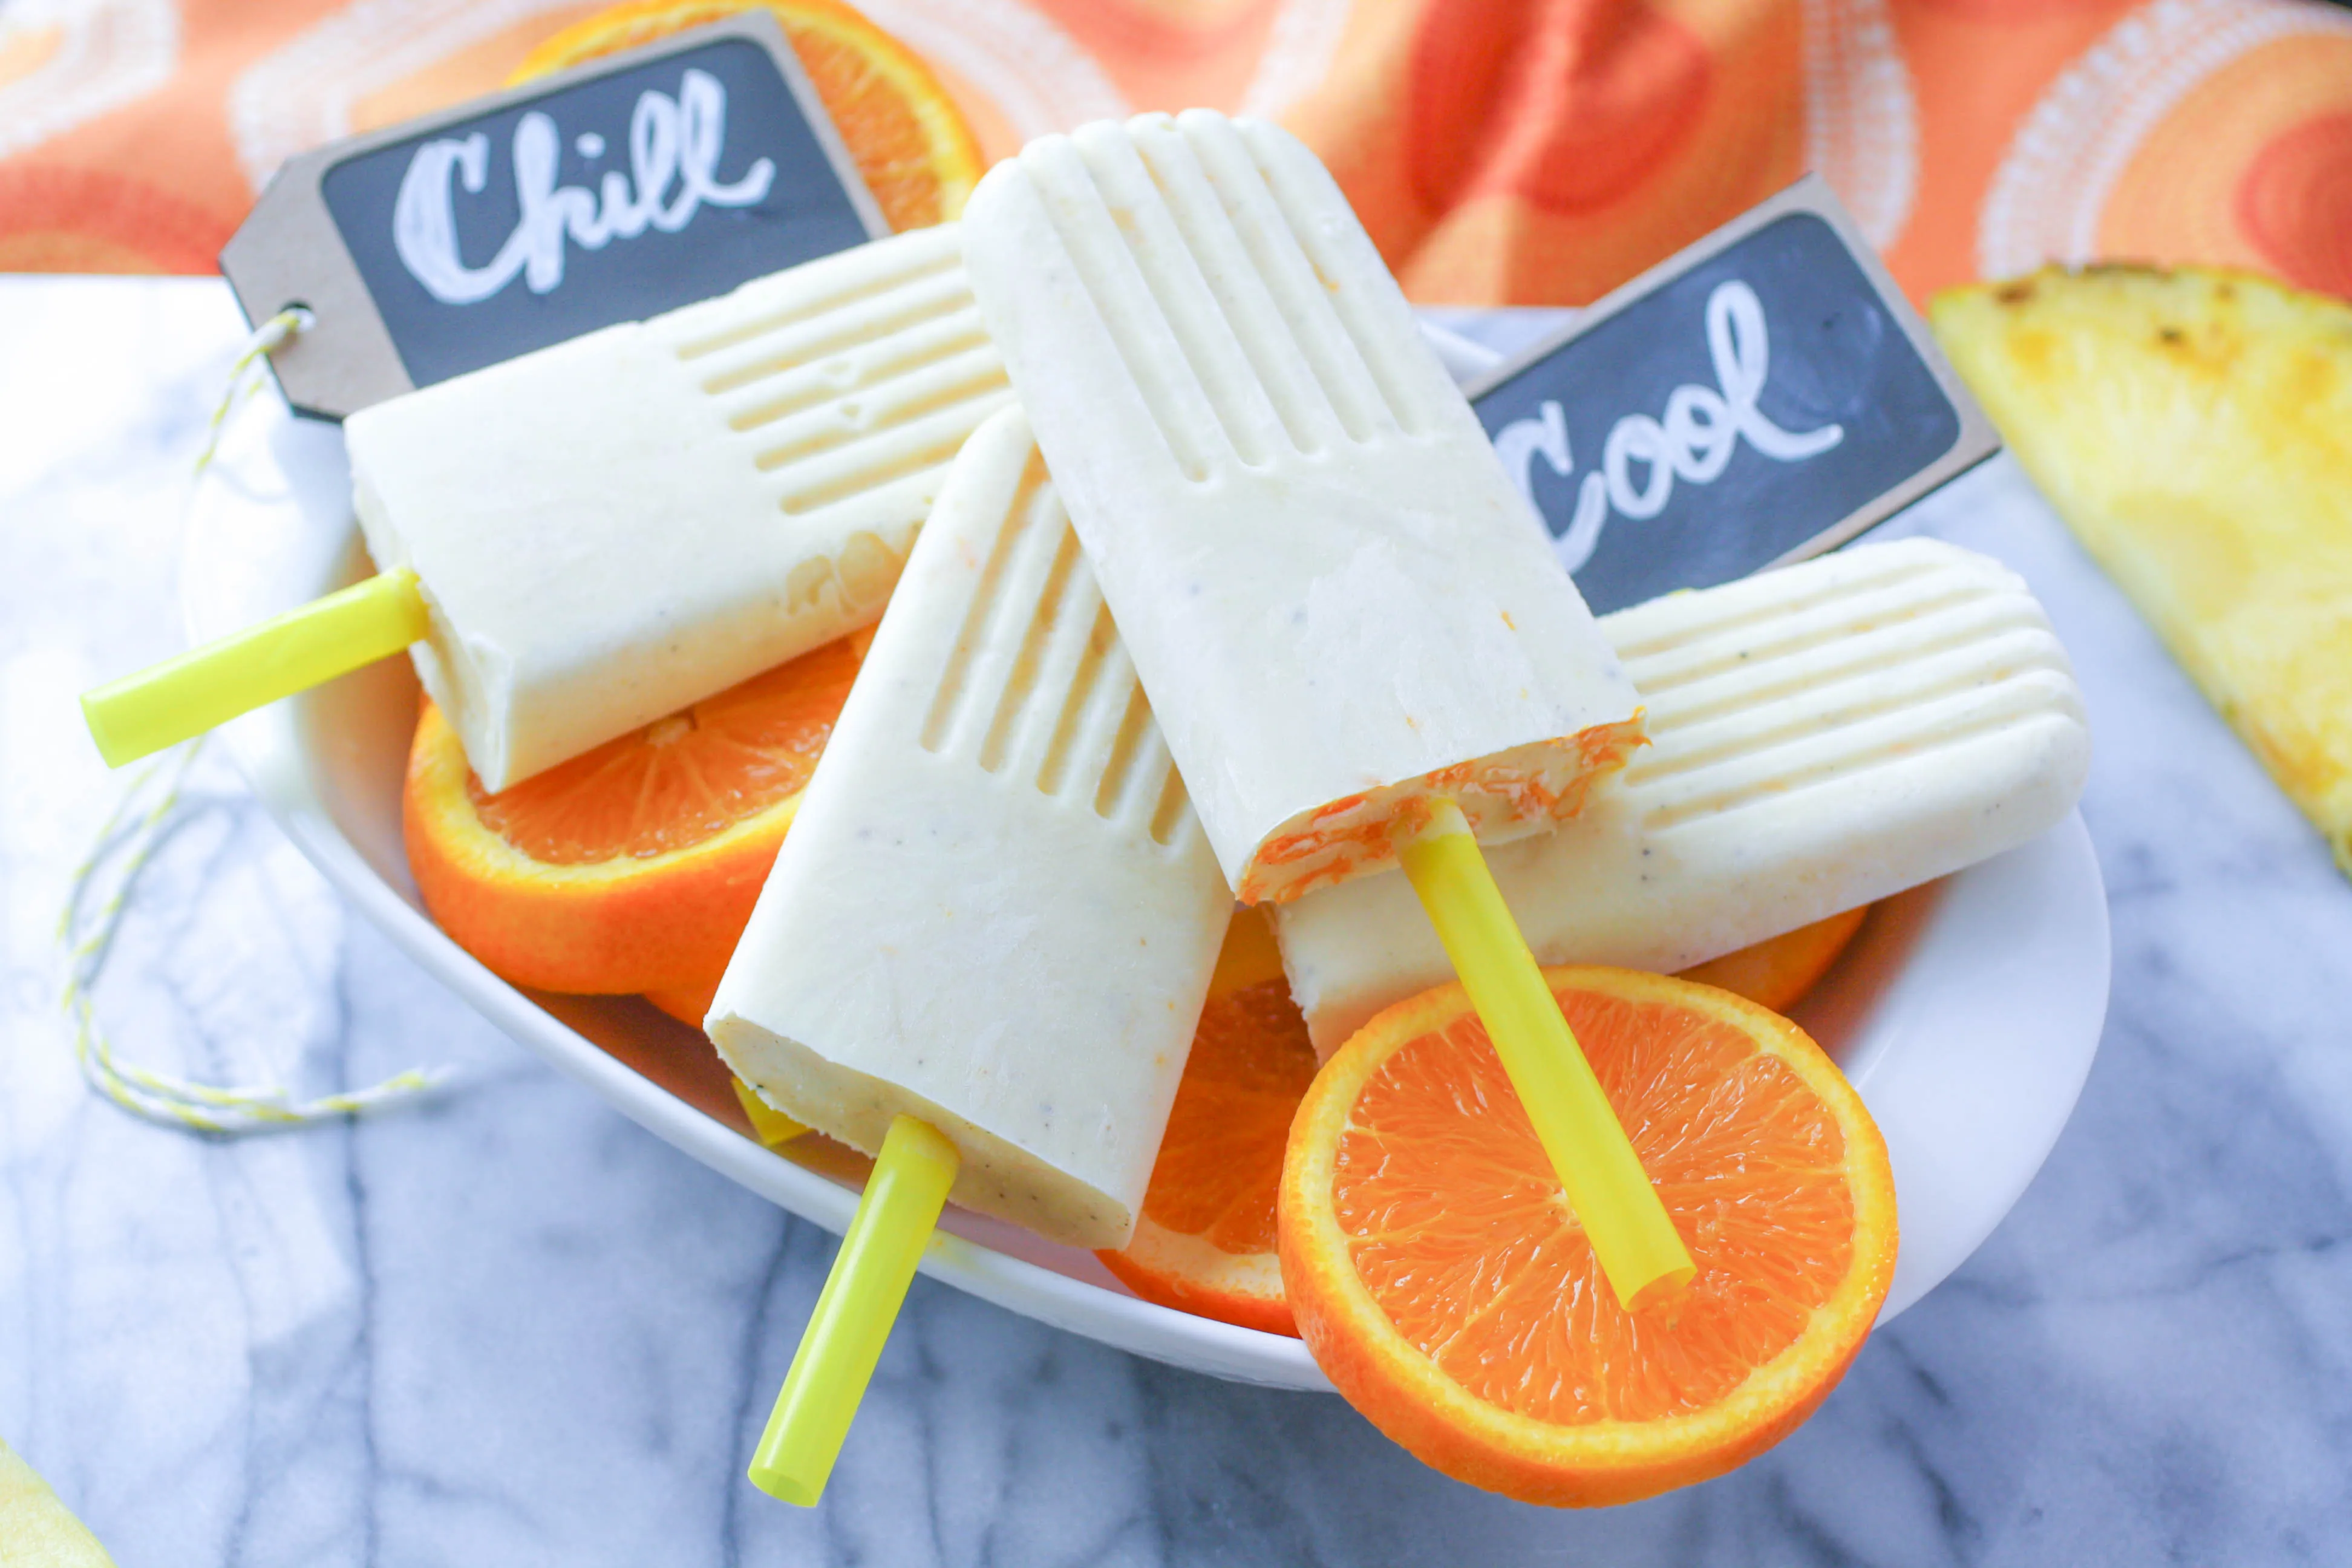 Pineapple-Orange & Cardamom Creamsicles make a fun summer treat. Pineapple-Orange & Cardamom Creamsicles are tasty on a cold day!